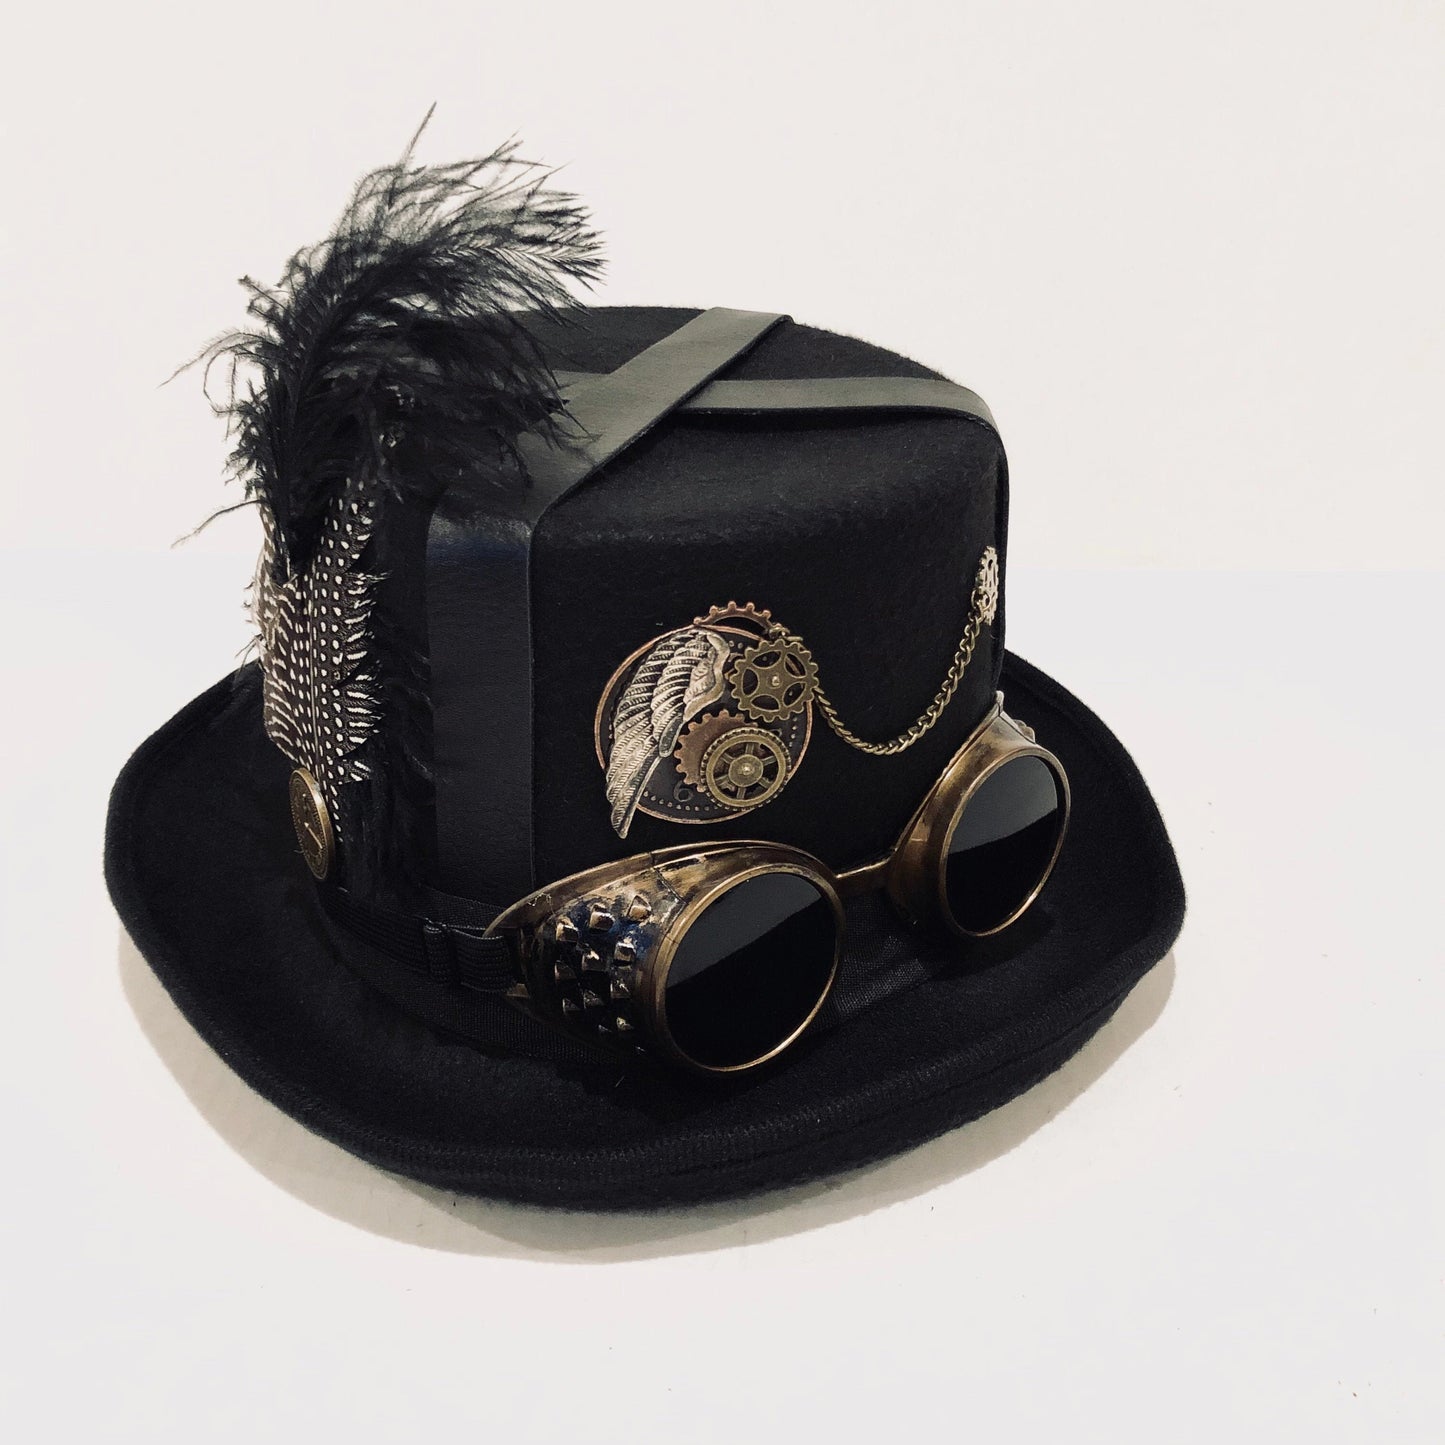 Deluxe Steampunk Top Hat